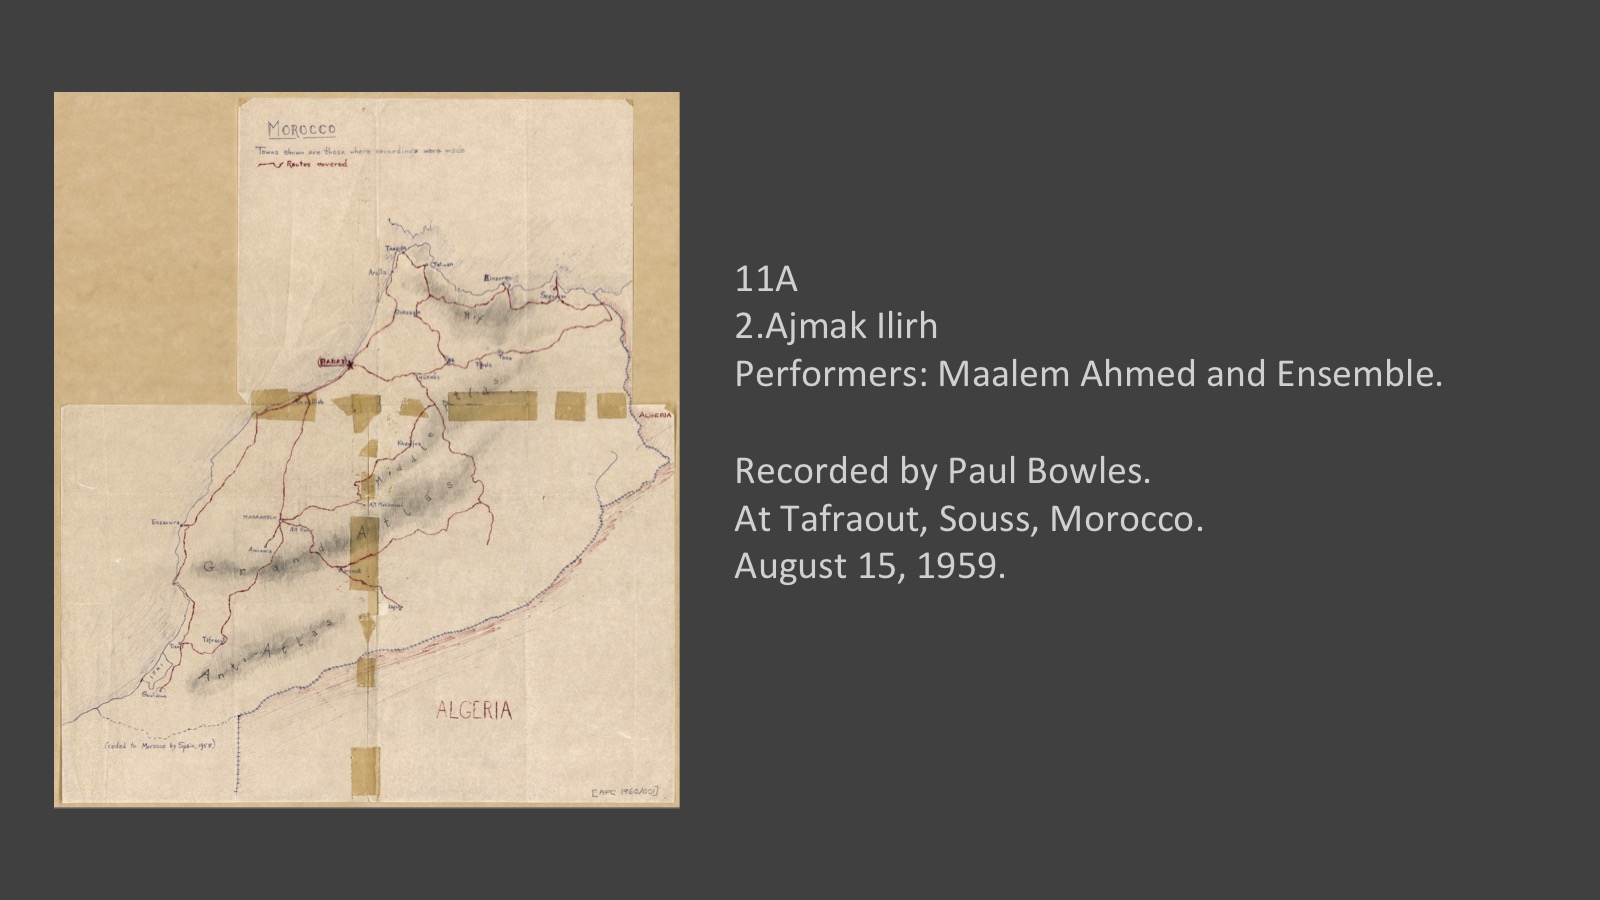 11A 
2. Ajmak Ilirh
Performers: Maalem Ahmed and Ensemble.

Recorded by Paul Bowles.
At Tafraout, Souss, Morocco, August 15, 1959.